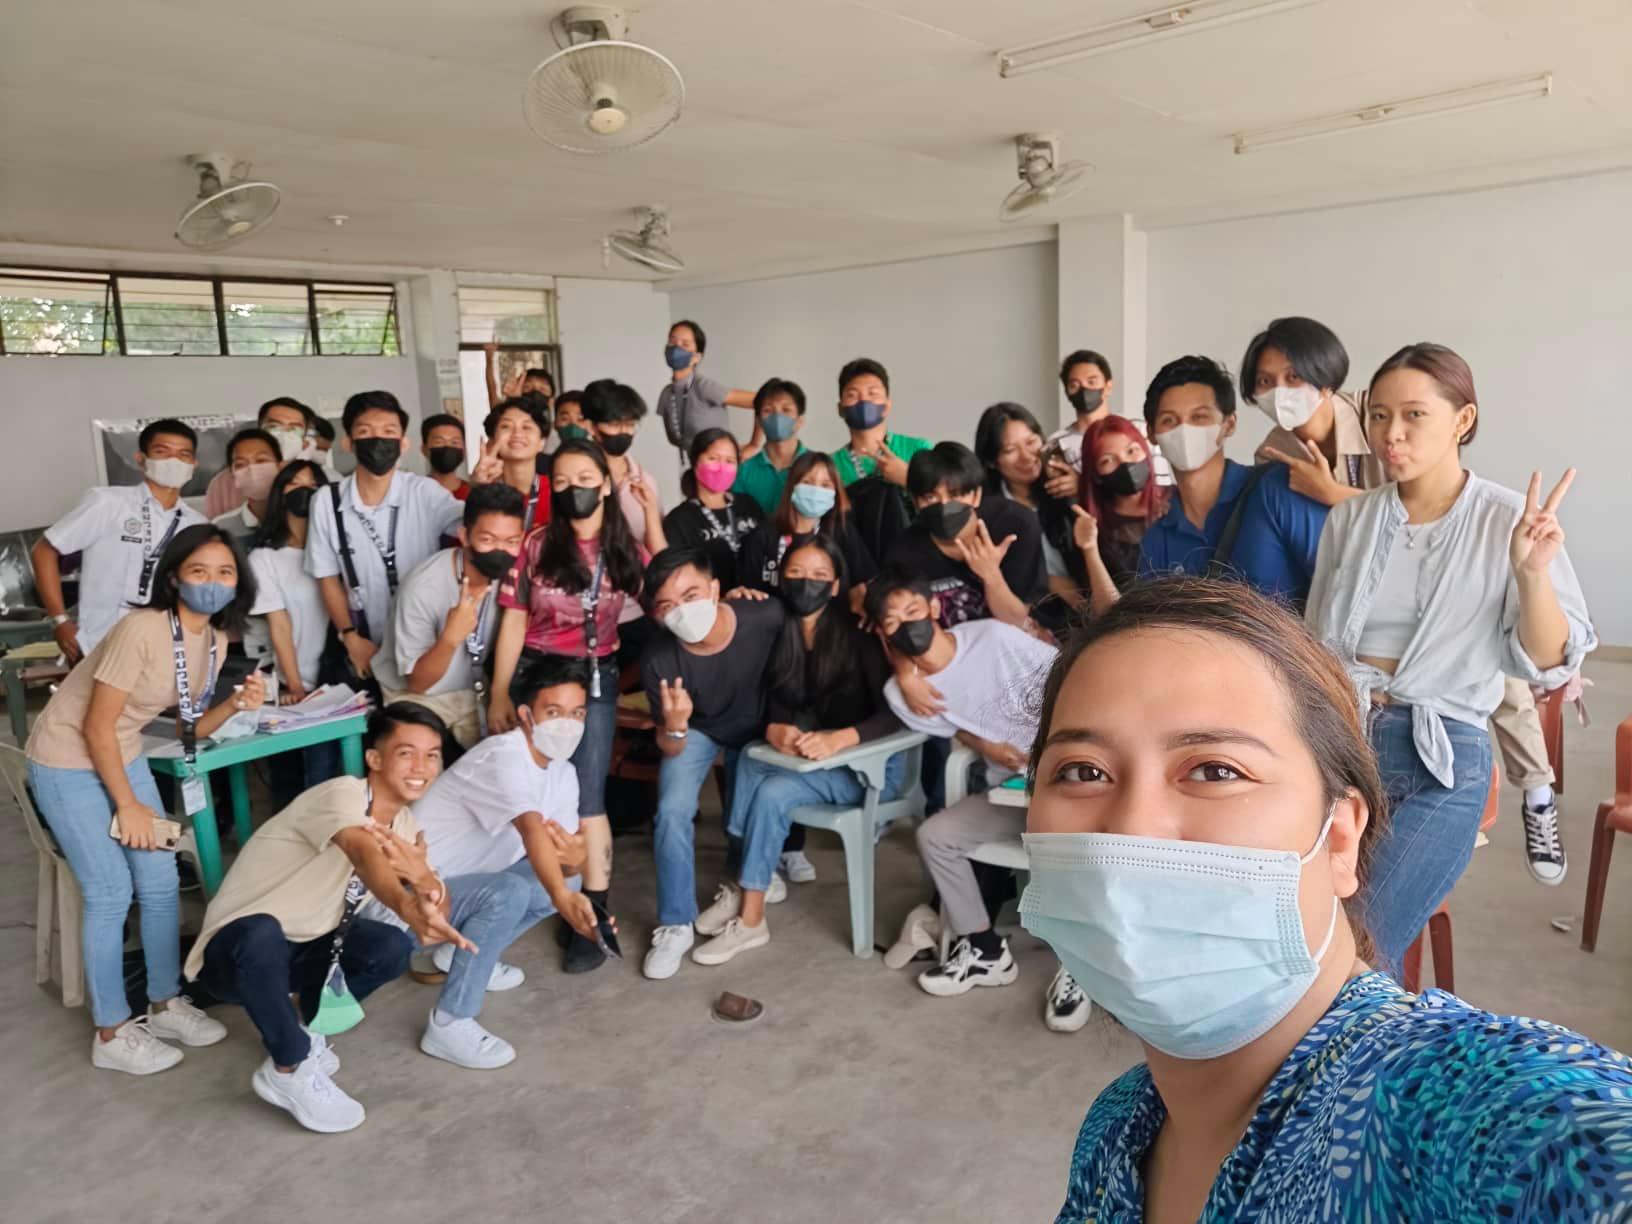 This Philippine Professor Asked Her Students To Make “Anti-Cheating” Hats For An Exam And They Delivered